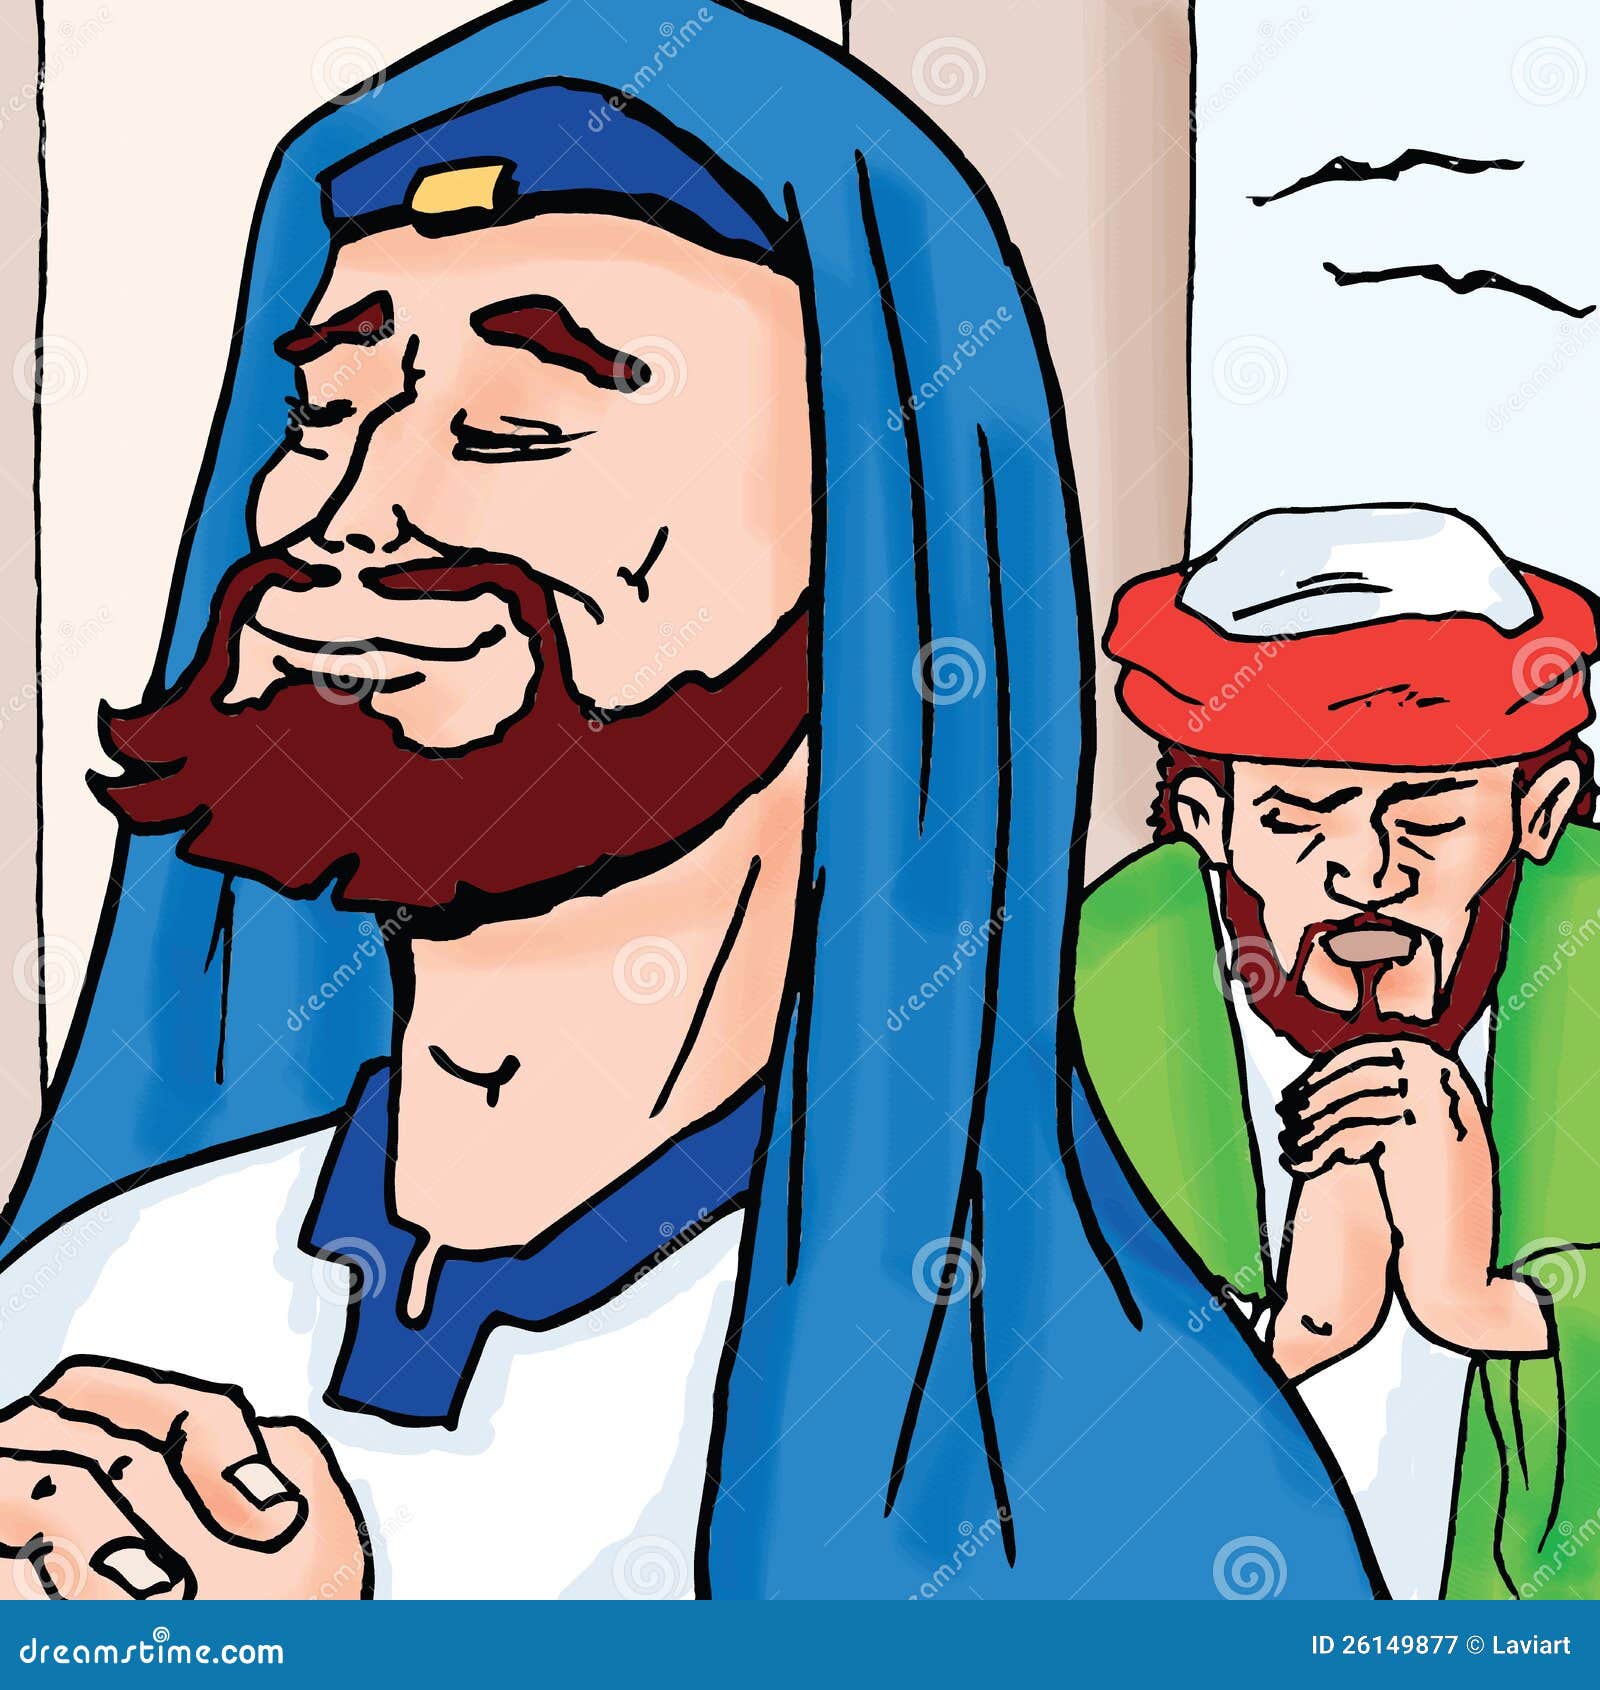 bible stories - the pharisee and the tax collector